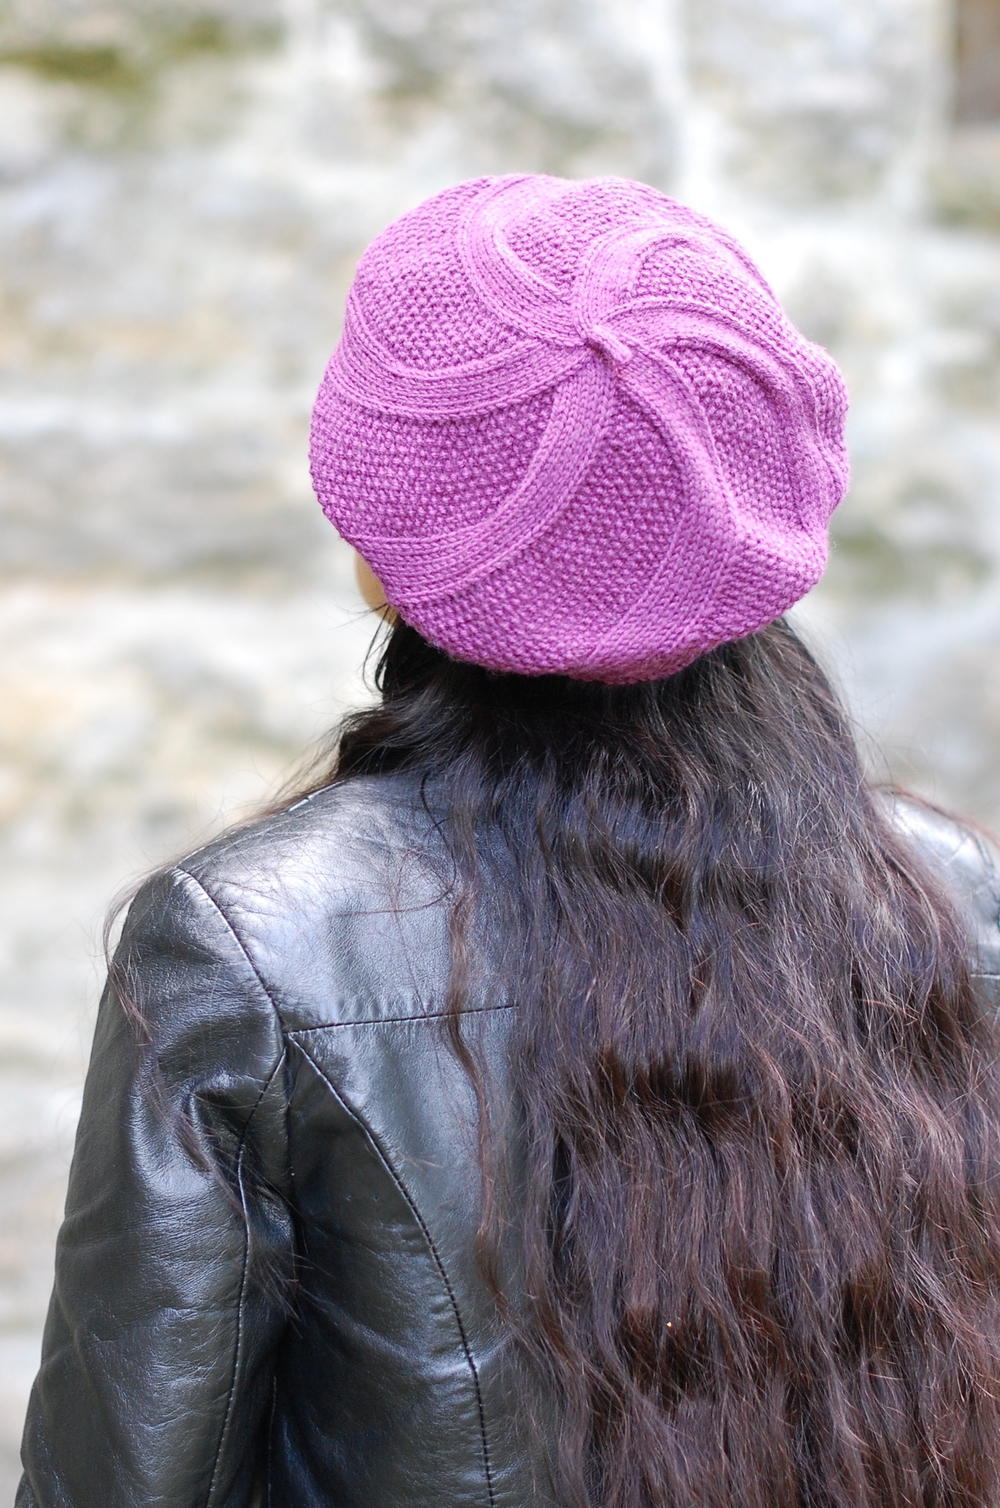 Coldharbour Twist by Woolly Wormhead in #2 Sport weight yarn in adult sizes.